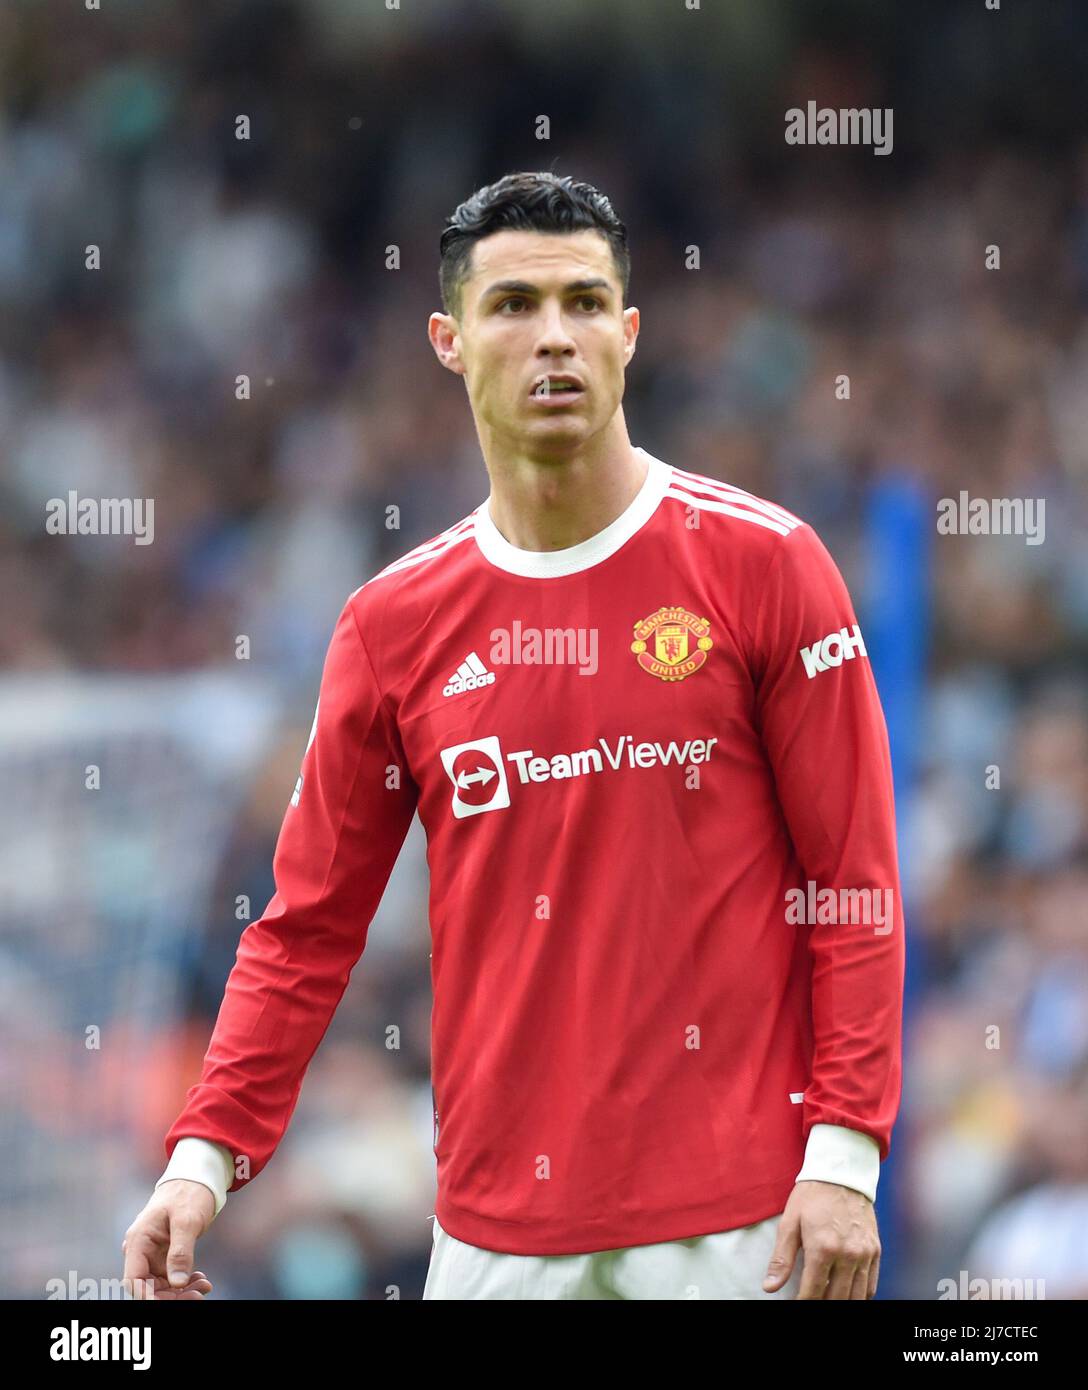 Cristiano Ronaldo of Manchester United during  the Premier League match between Brighton and Hove Albion and Manchester United at the American Express Stadium  , Brighton , UK - 7th May 2022  Photo Simon Dack/Telephoto Images Editorial use only. No merchandising. For Football images FA and Premier League restrictions apply inc. no internet/mobile usage without FAPL license - for details contact Football Dataco Stock Photo